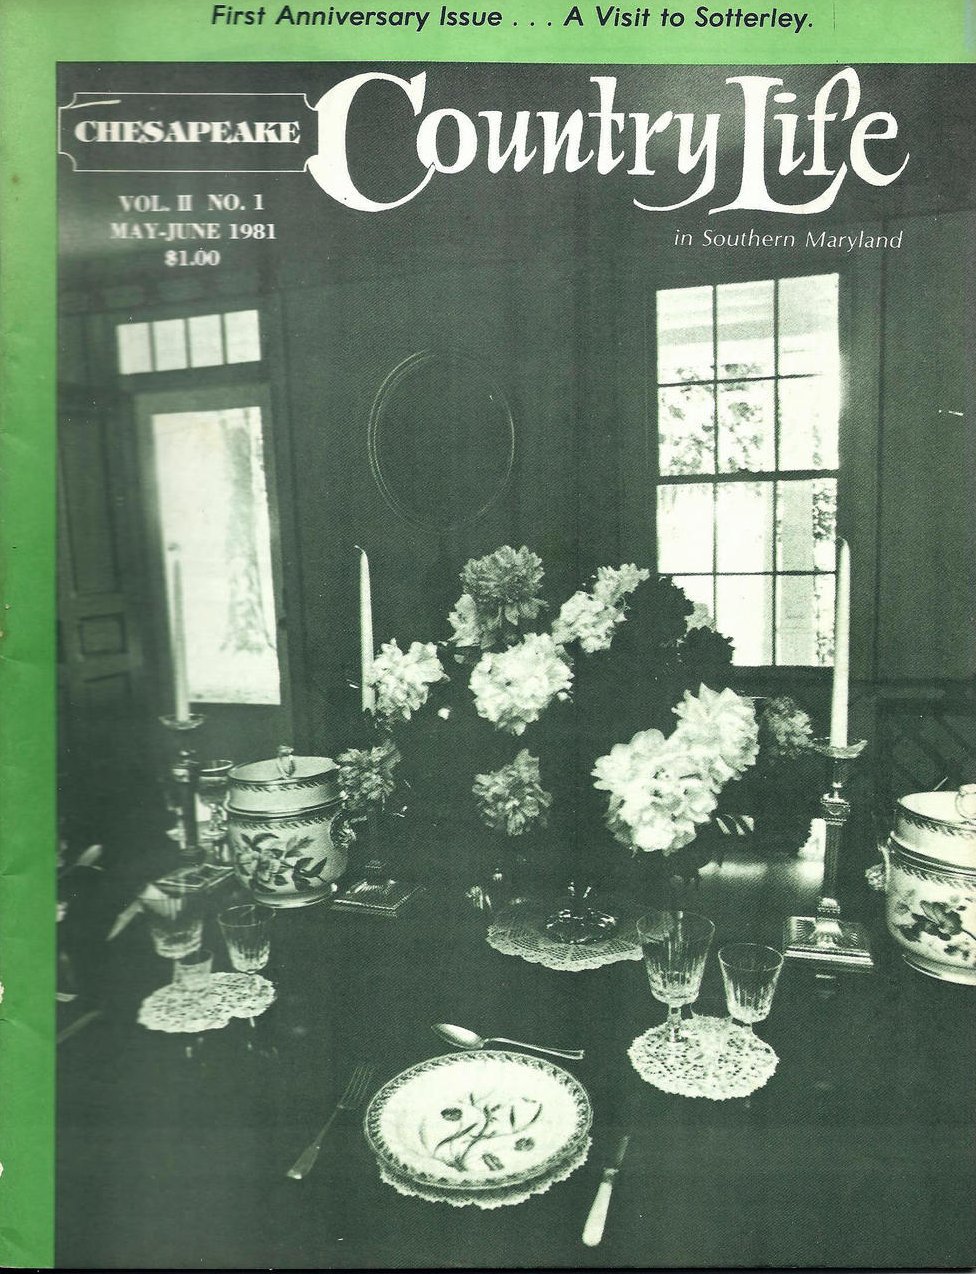 Chesapeake Country Life in Southern Maryland Vol II No 1 May June 1981